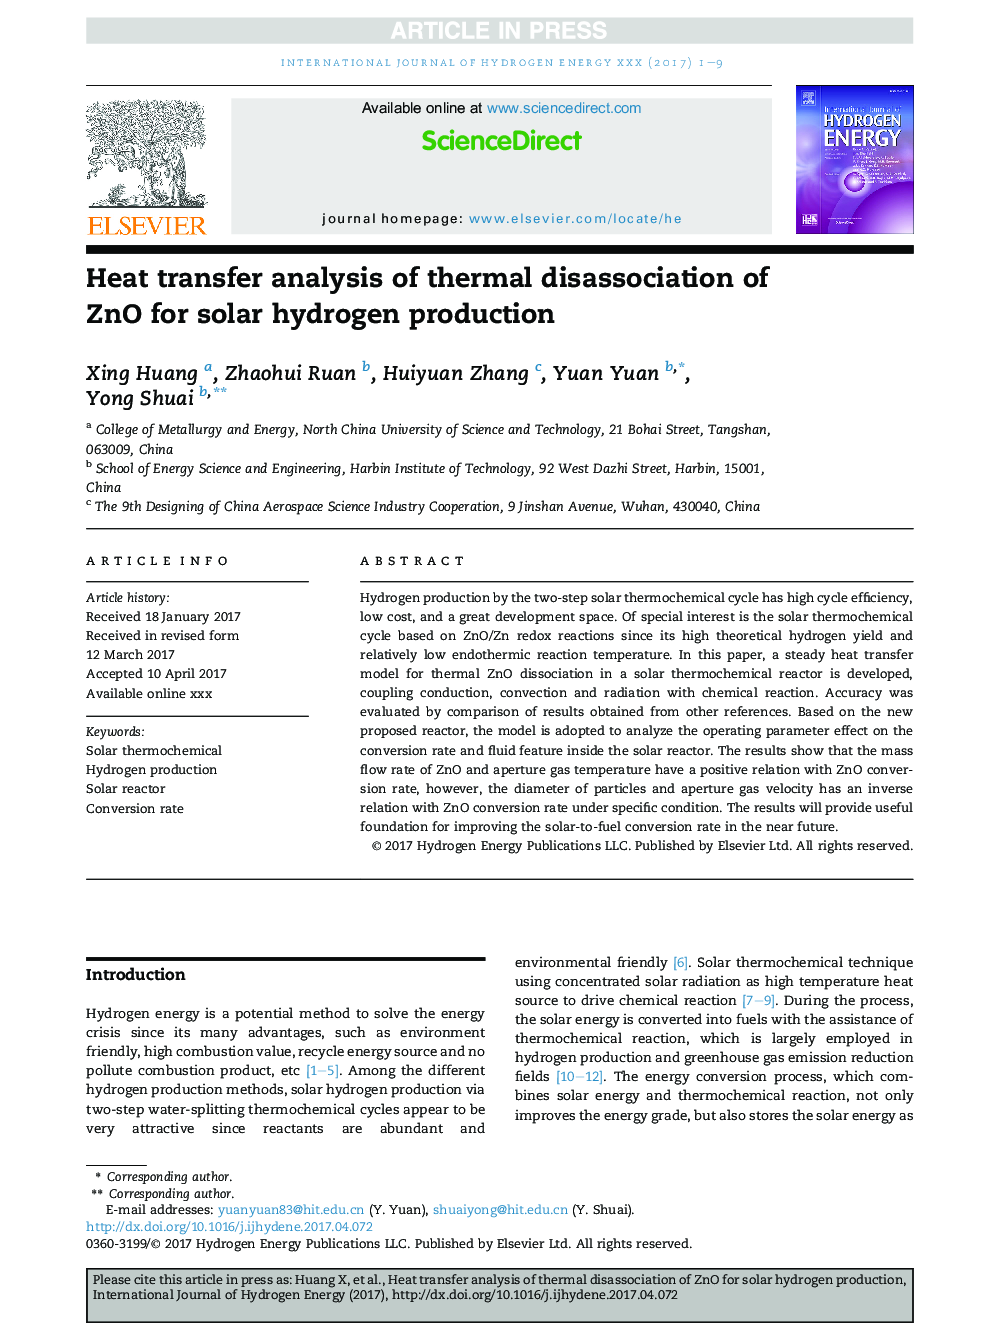 Heat transfer analysis of thermal disassociation of ZnO for solar hydrogen production